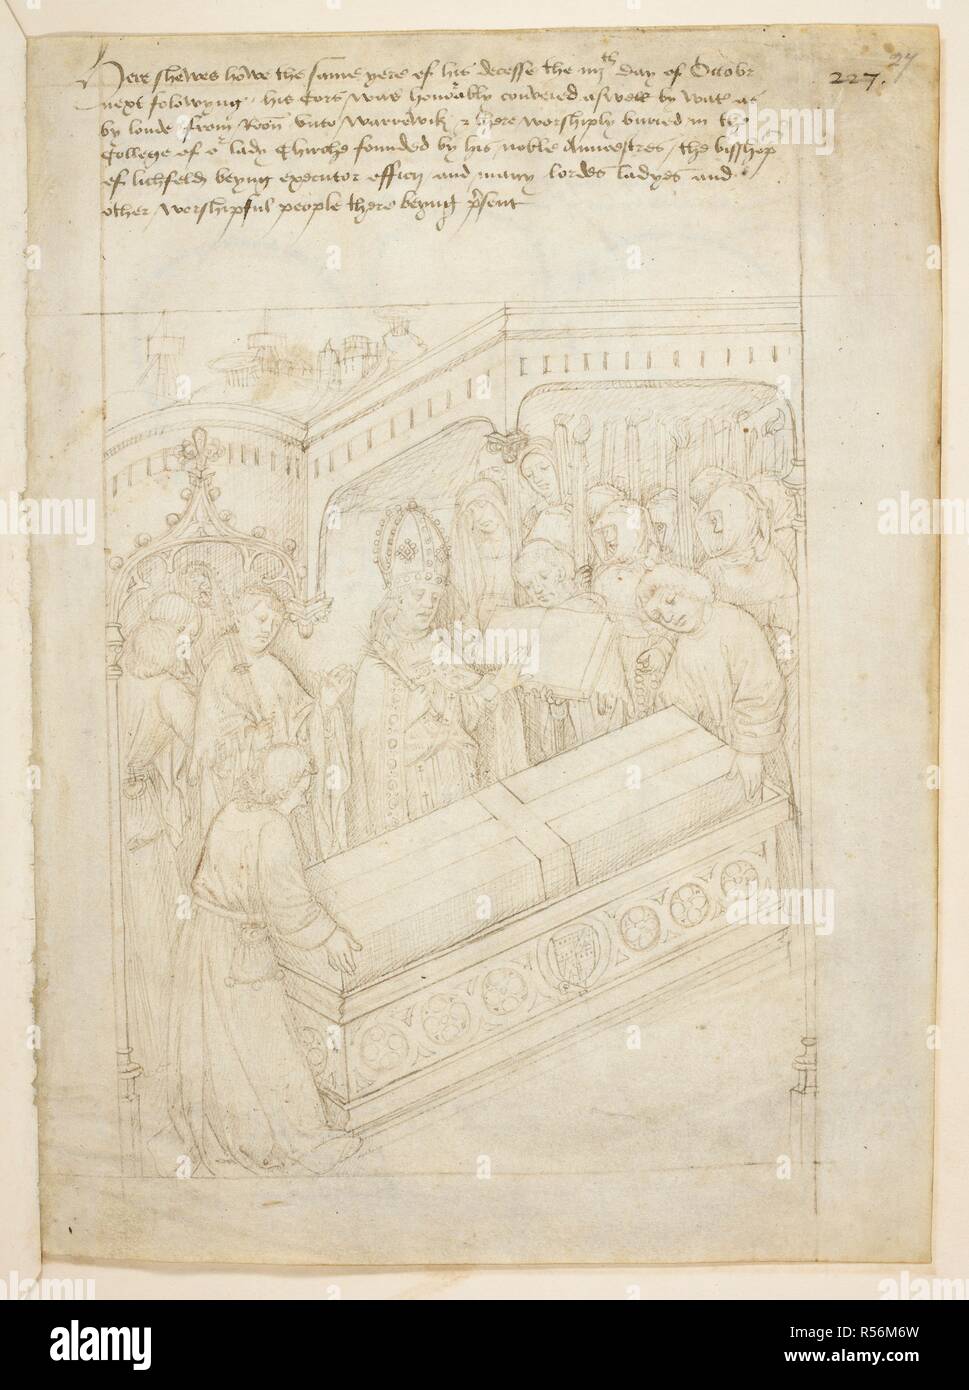 Richard Beauchamp, Earl of Warwick, being buried in his coffin, in St. Mary's church, Warwick. The Bishop of Lichfield conducts the funeral ceremony. Beauchamp pageants. S. Netherlands [Bruges?]; after 1483. Source: Cotton Julius E. IV art.6 f.27. Stock Photo